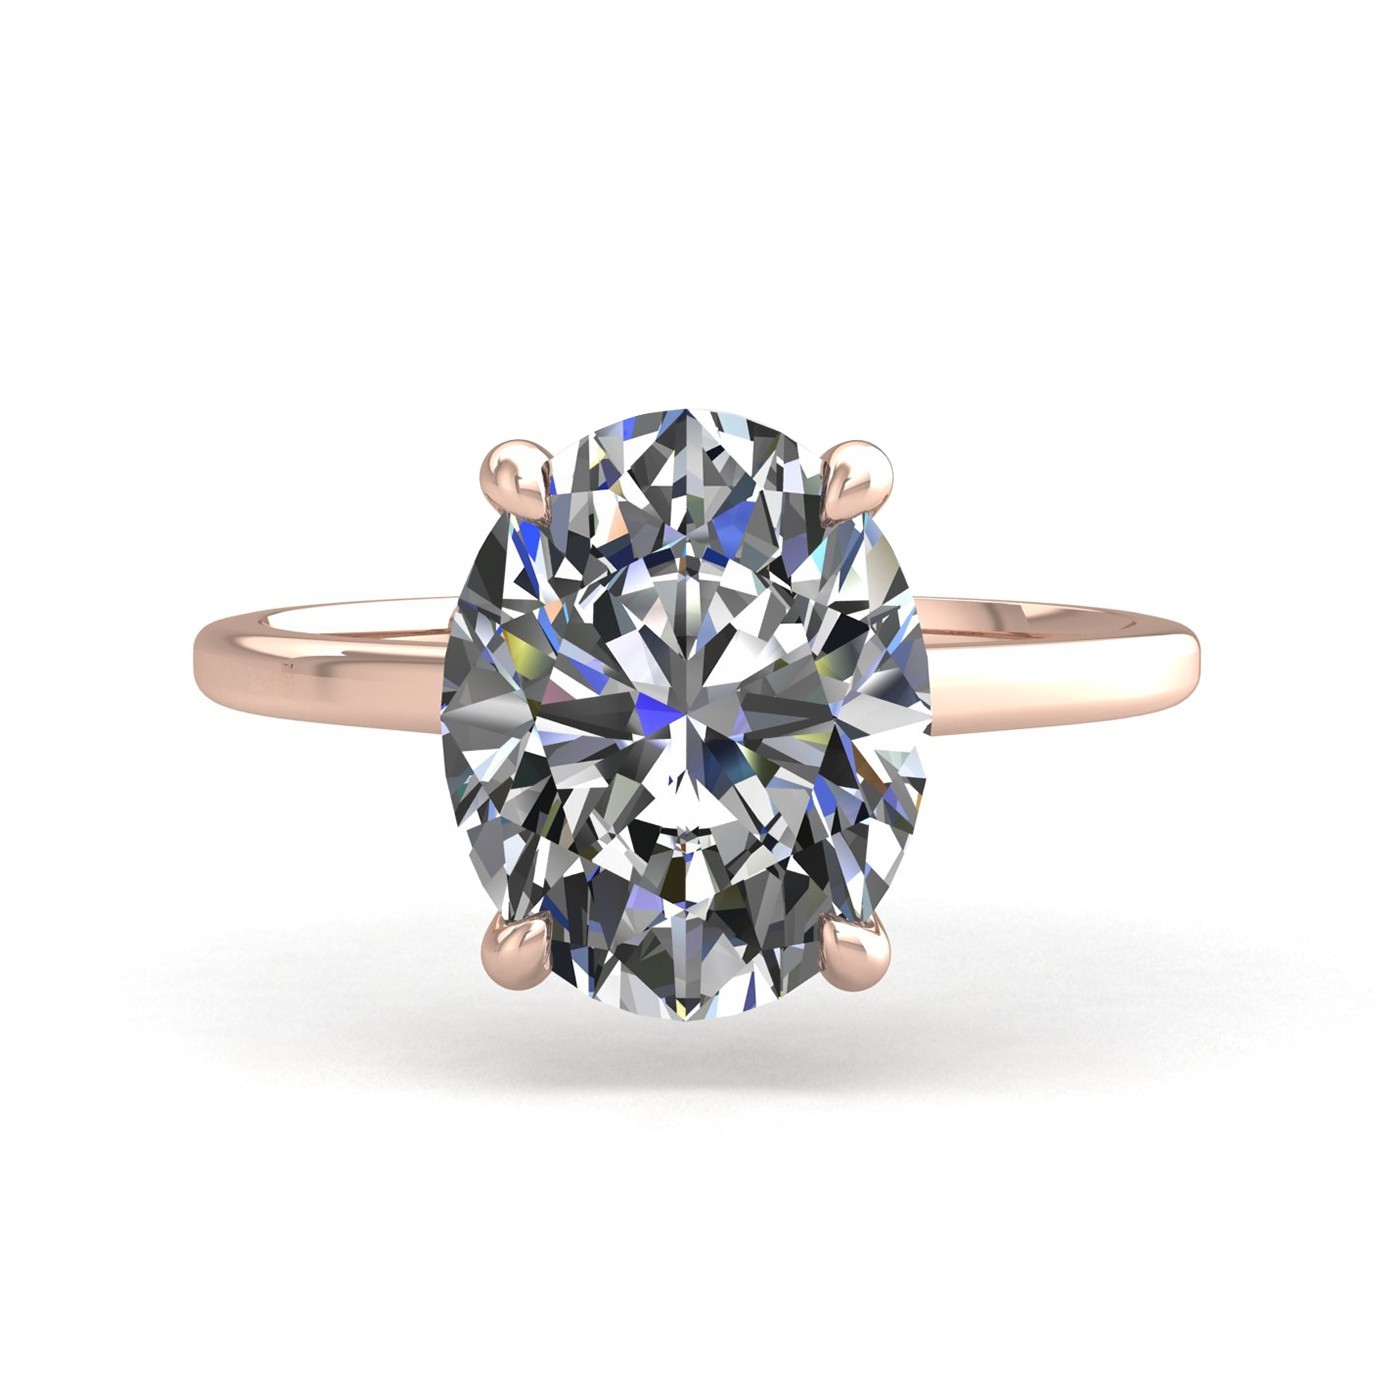 18k rose gold  2,50 ct 4 prongs solitaire oval cut diamond engagement ring with whisper thin band